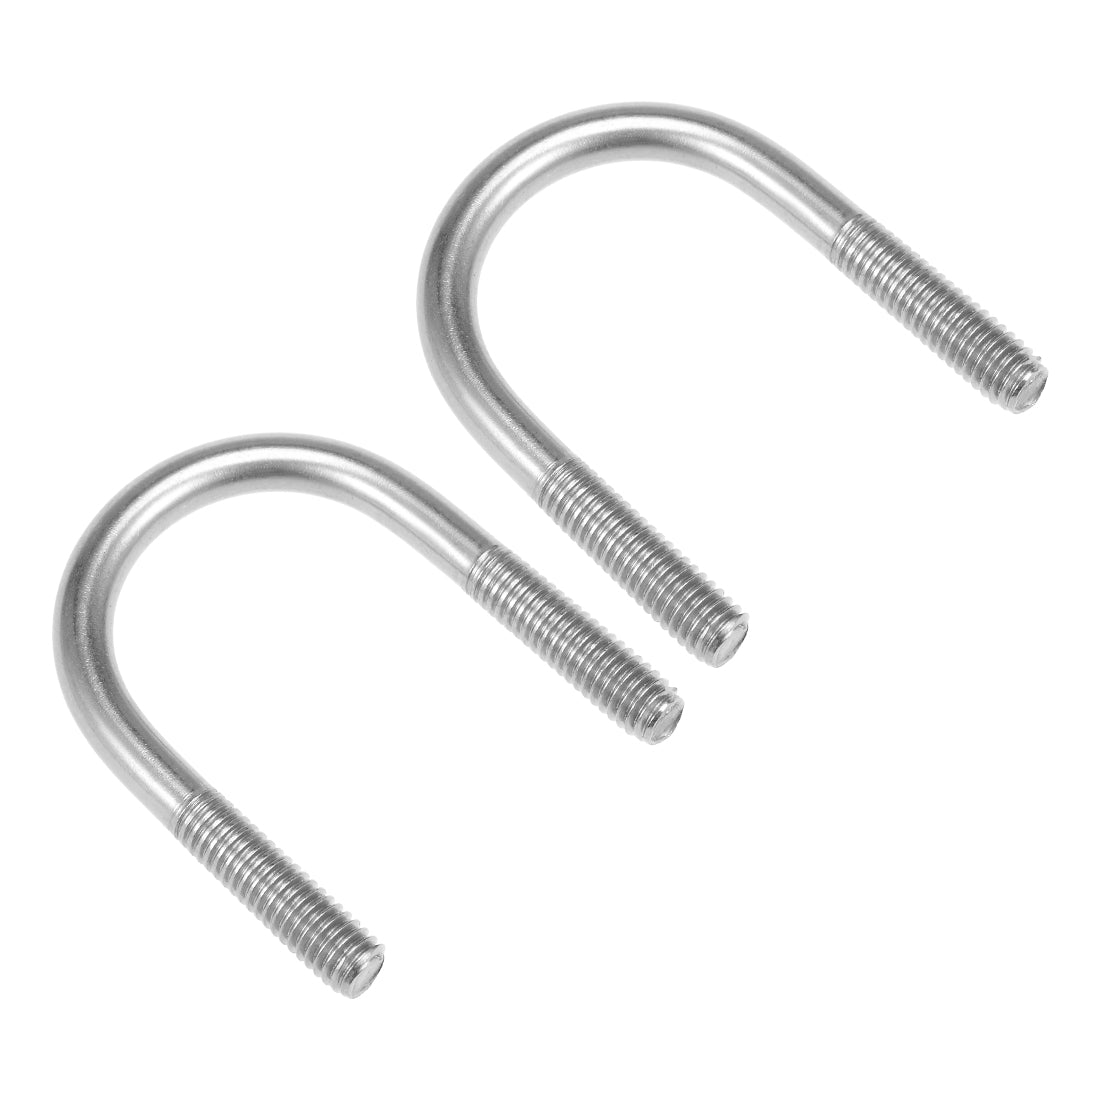 uxcell Uxcell U-Bolts 36mm Inner Width 304 Stainless Steel M8 U-Bolt for 33mm Pipe Dia 2pcs